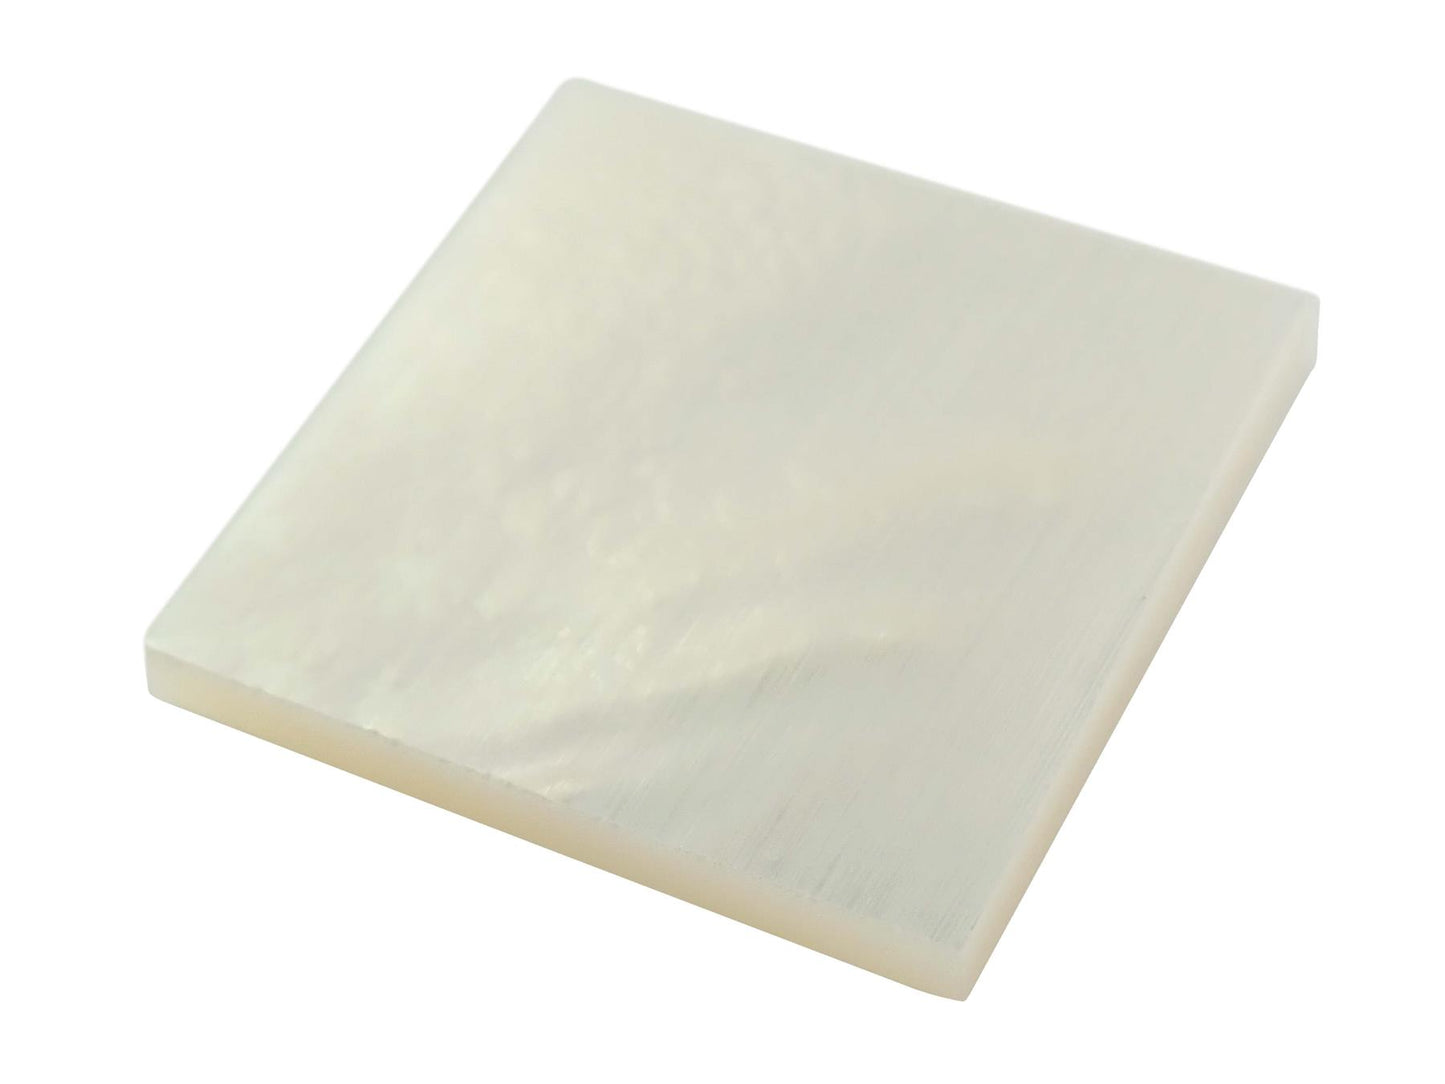 Incudo White Mother of Pearl Inlay Blank - 20x20x2mm (0.79x0.79x0.08")